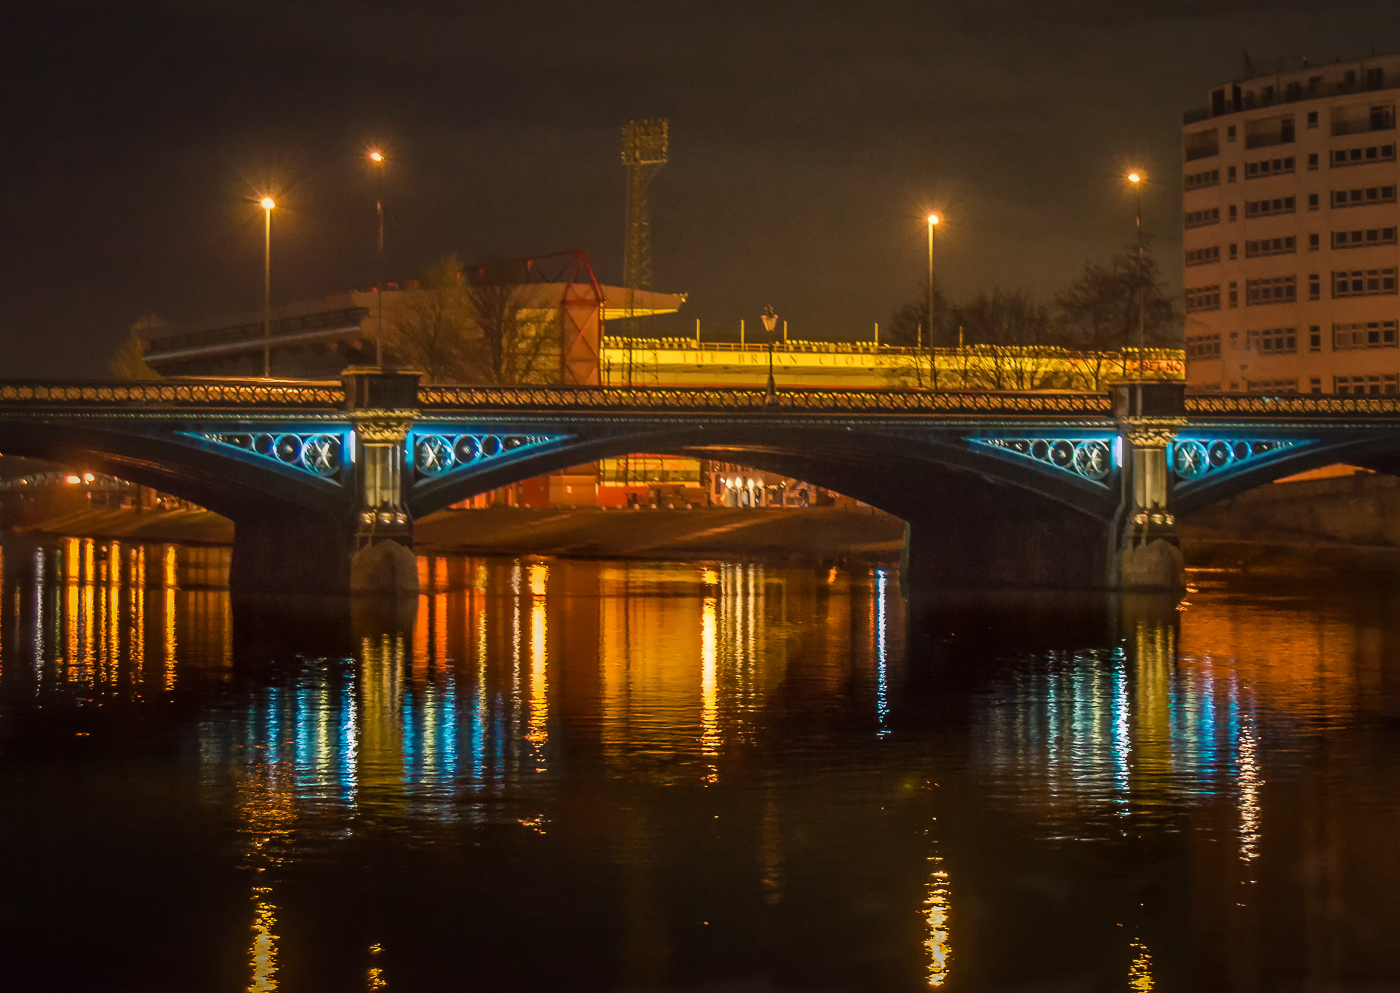 TRENT BRIDGE BY NIGHT by Mark Taylor